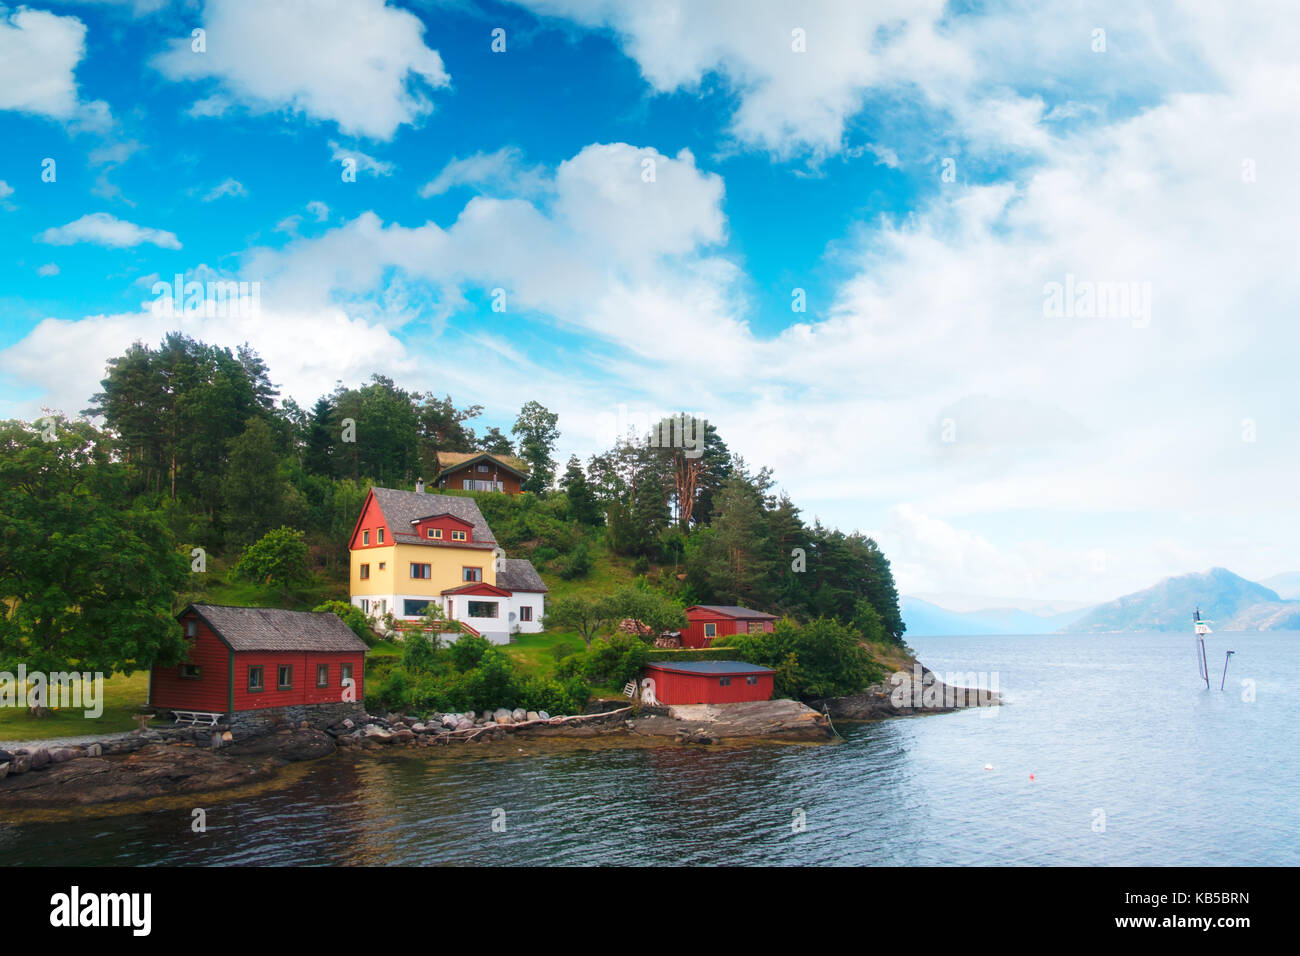 Typical norwegian landscape with red house Stock Photo